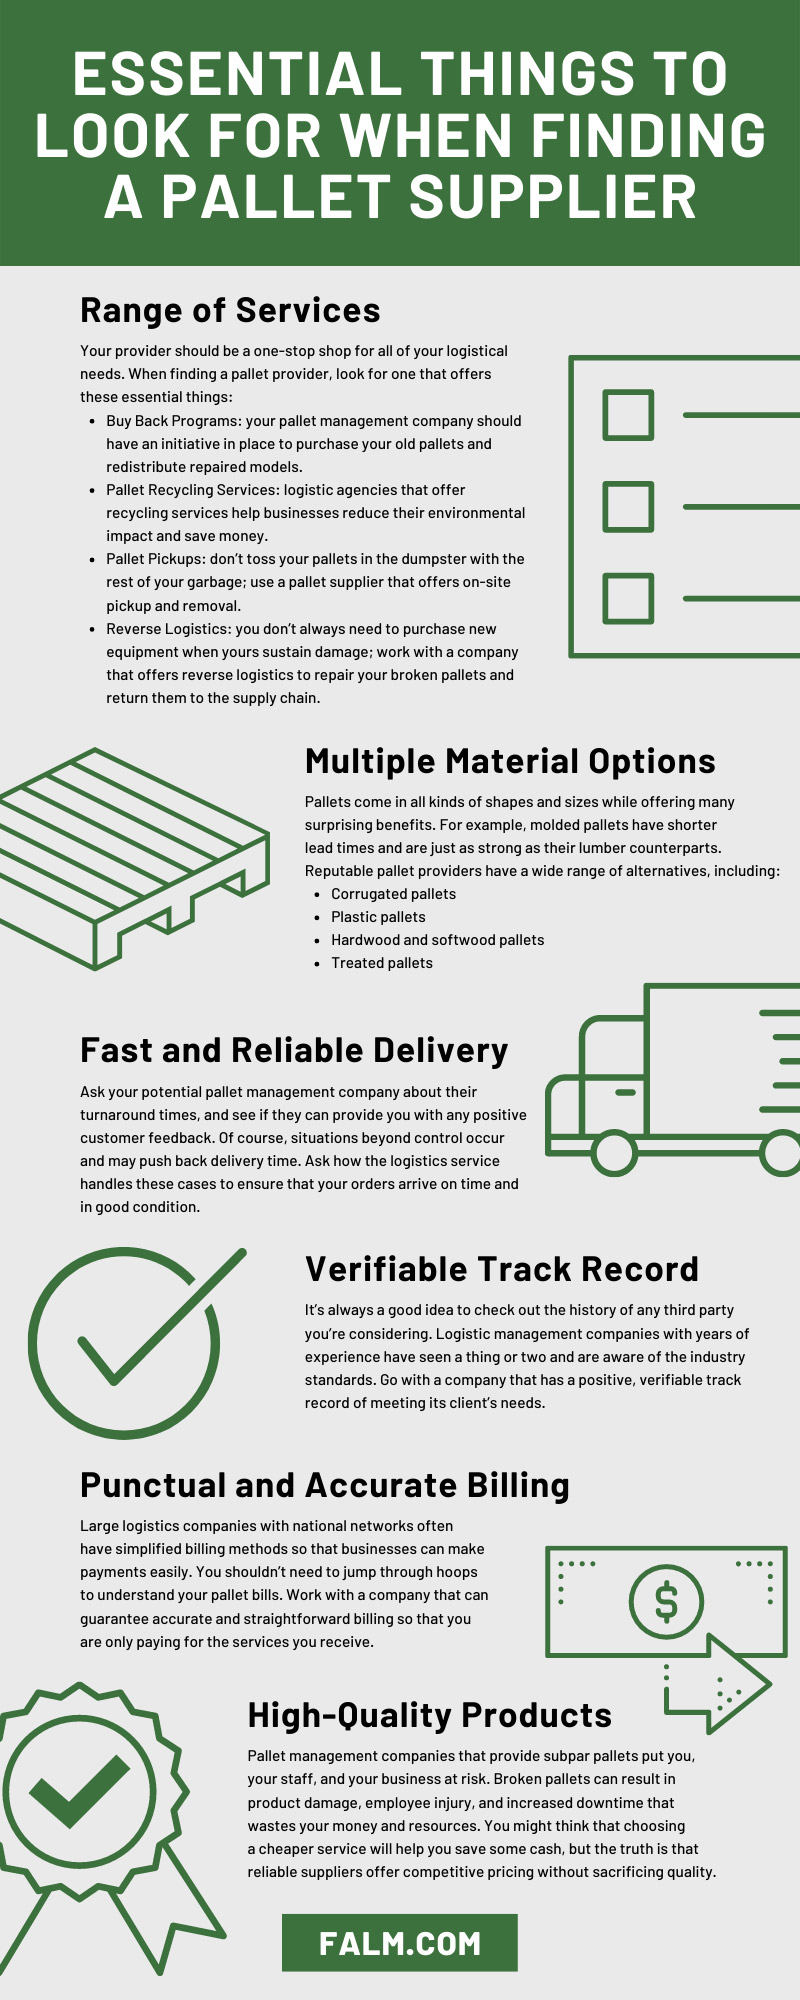 Essential Things To Look for When Finding a Pallet Supplier